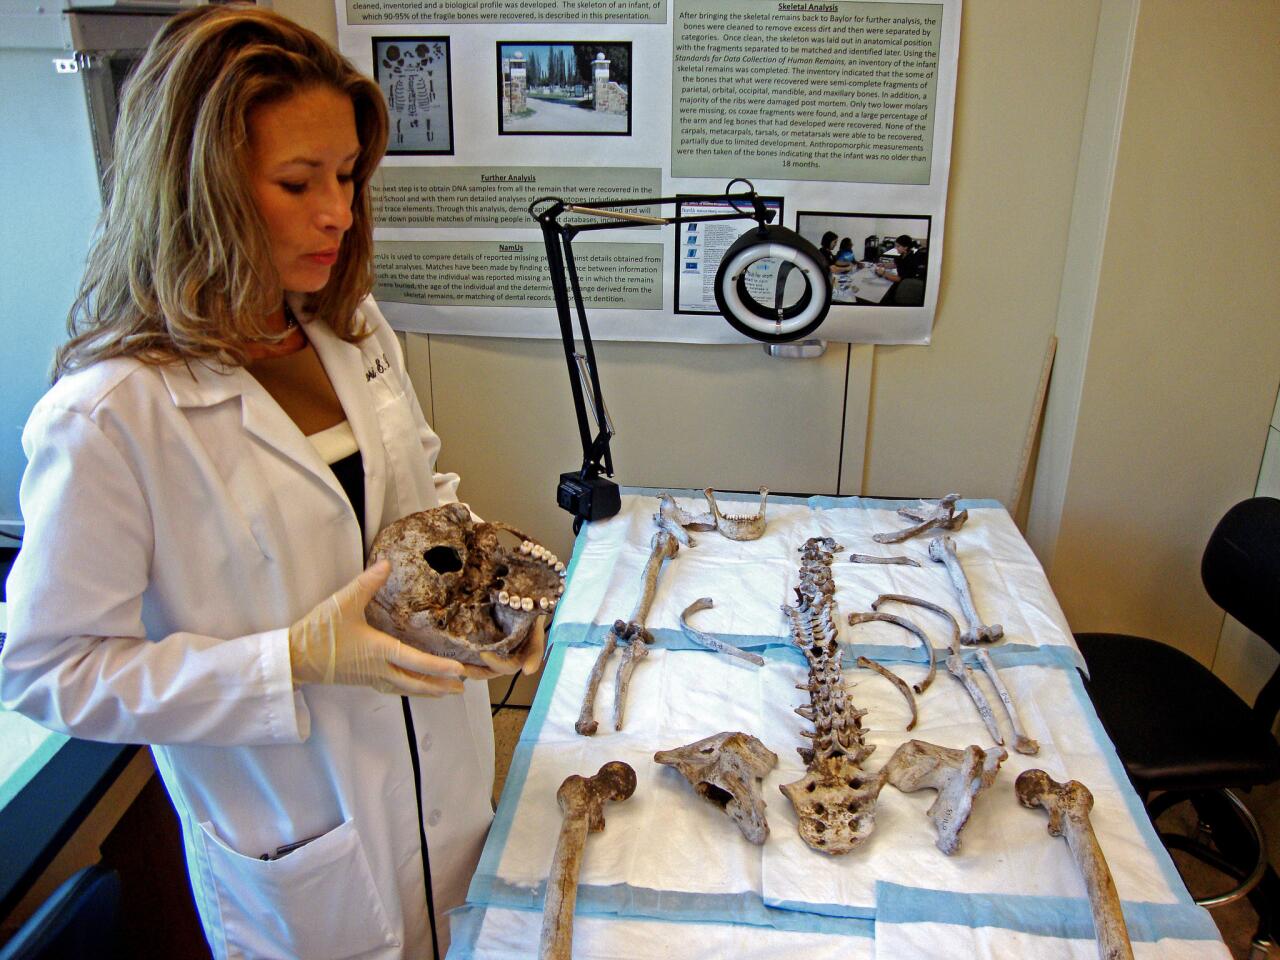 Lori Baker, an associate professor of forensic anthropology at Baylor University in Waco, Texas, inventories human remains recovered on a South Texas ranch. Baker has spent the past decade at the building databases and working with Mexican and U.S. authorities to identify the remains of illegal immigrants. There has been a recent increase in such deaths in Texas. deaths.